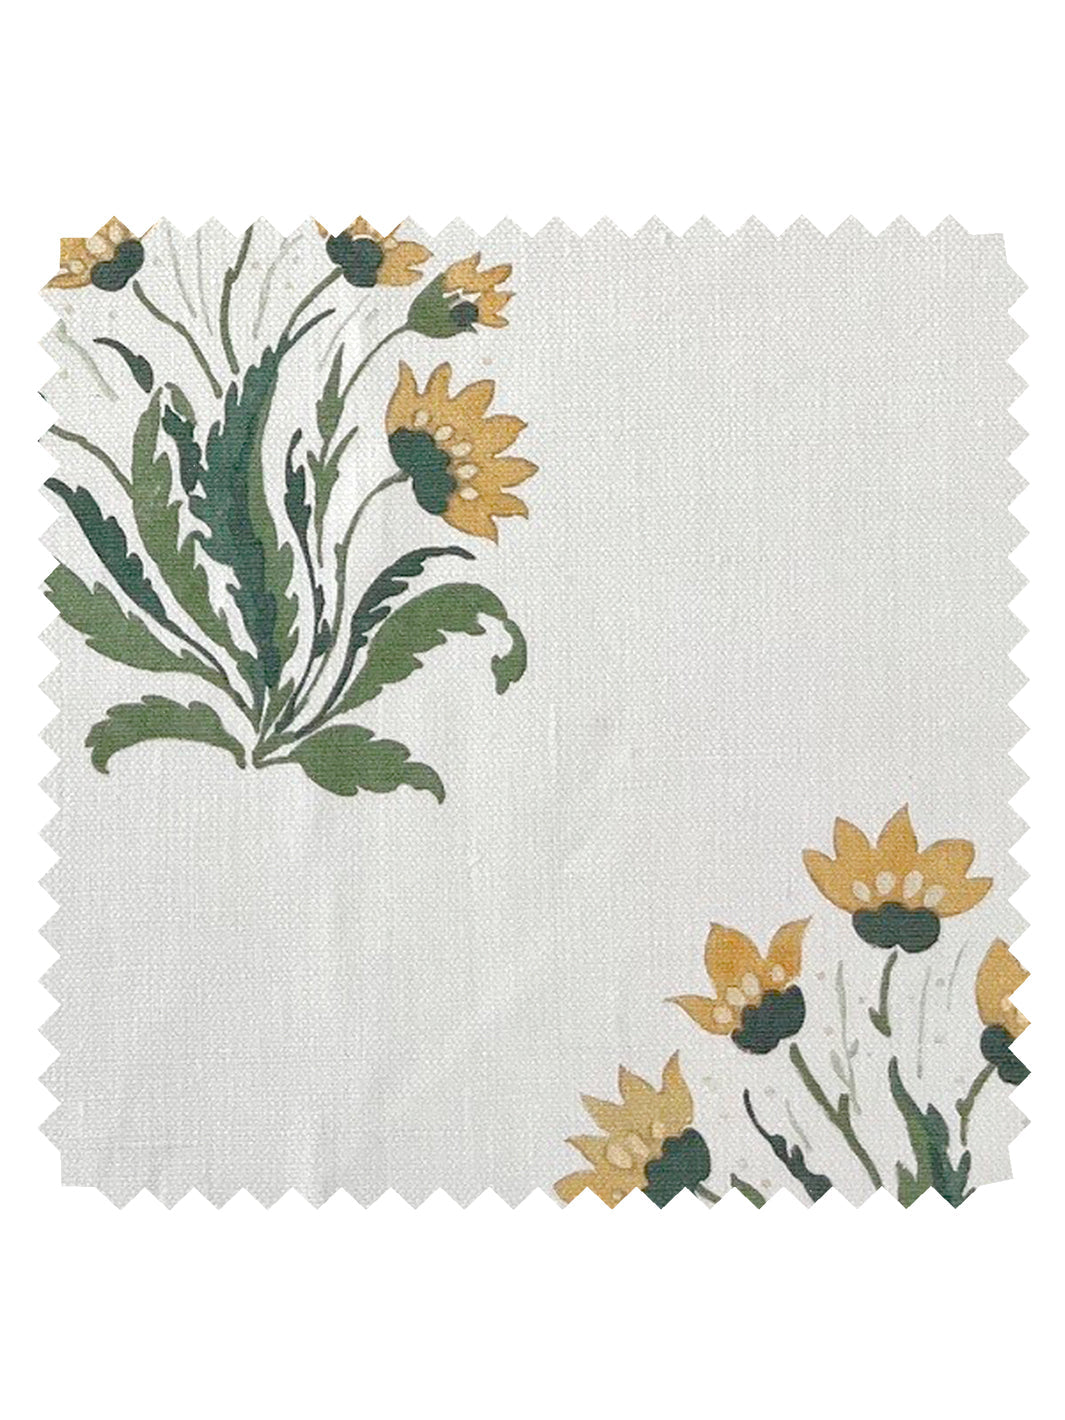 'Hillhouse Block Print Small' Linen Fabric by Nathan Turner - Gold Green